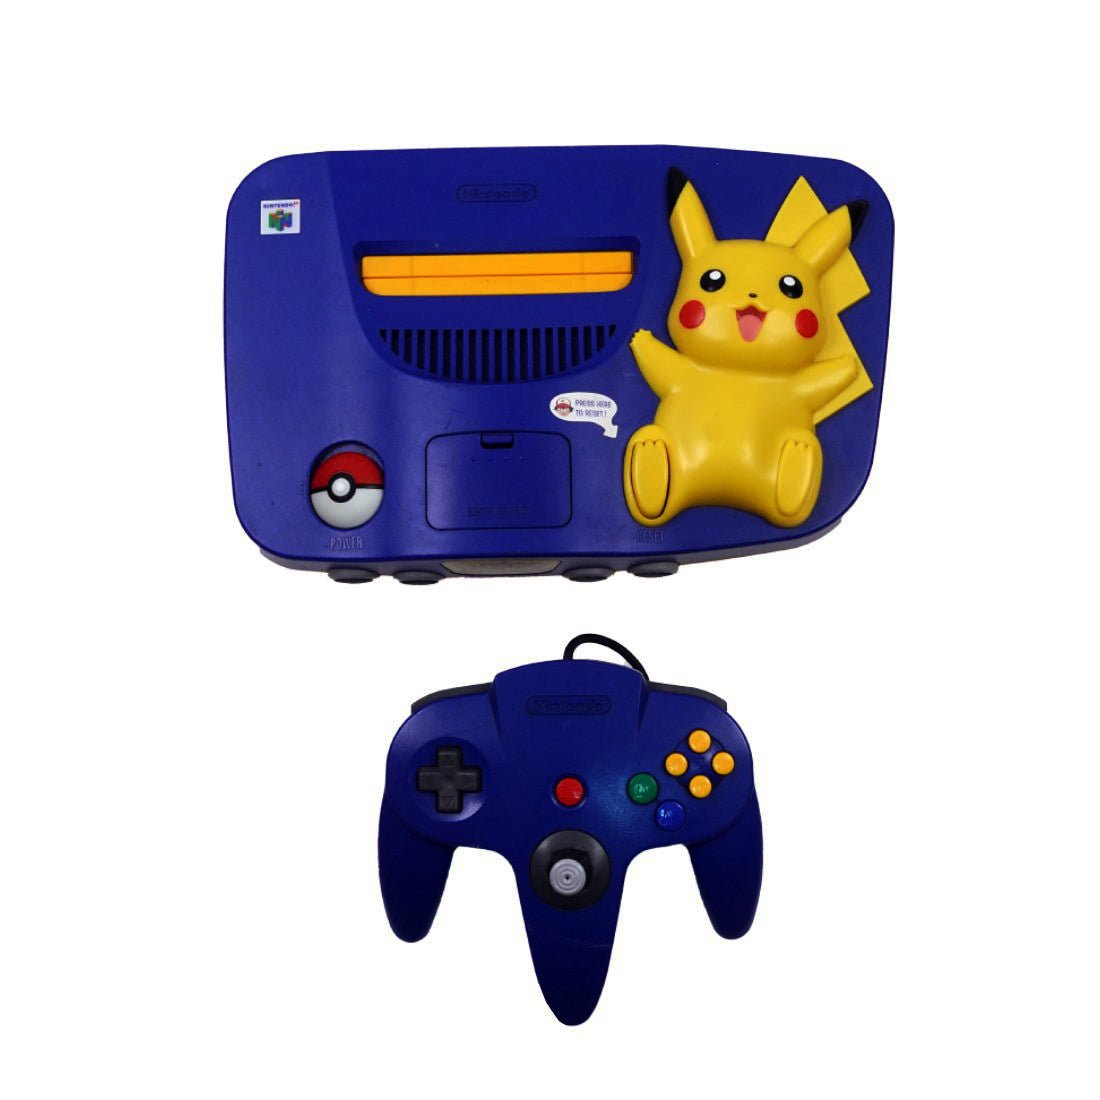 (Pre-Owned) Nintendo 64 Video Game Console - Pikachu Edition - ريترو - Store 974 | ستور ٩٧٤